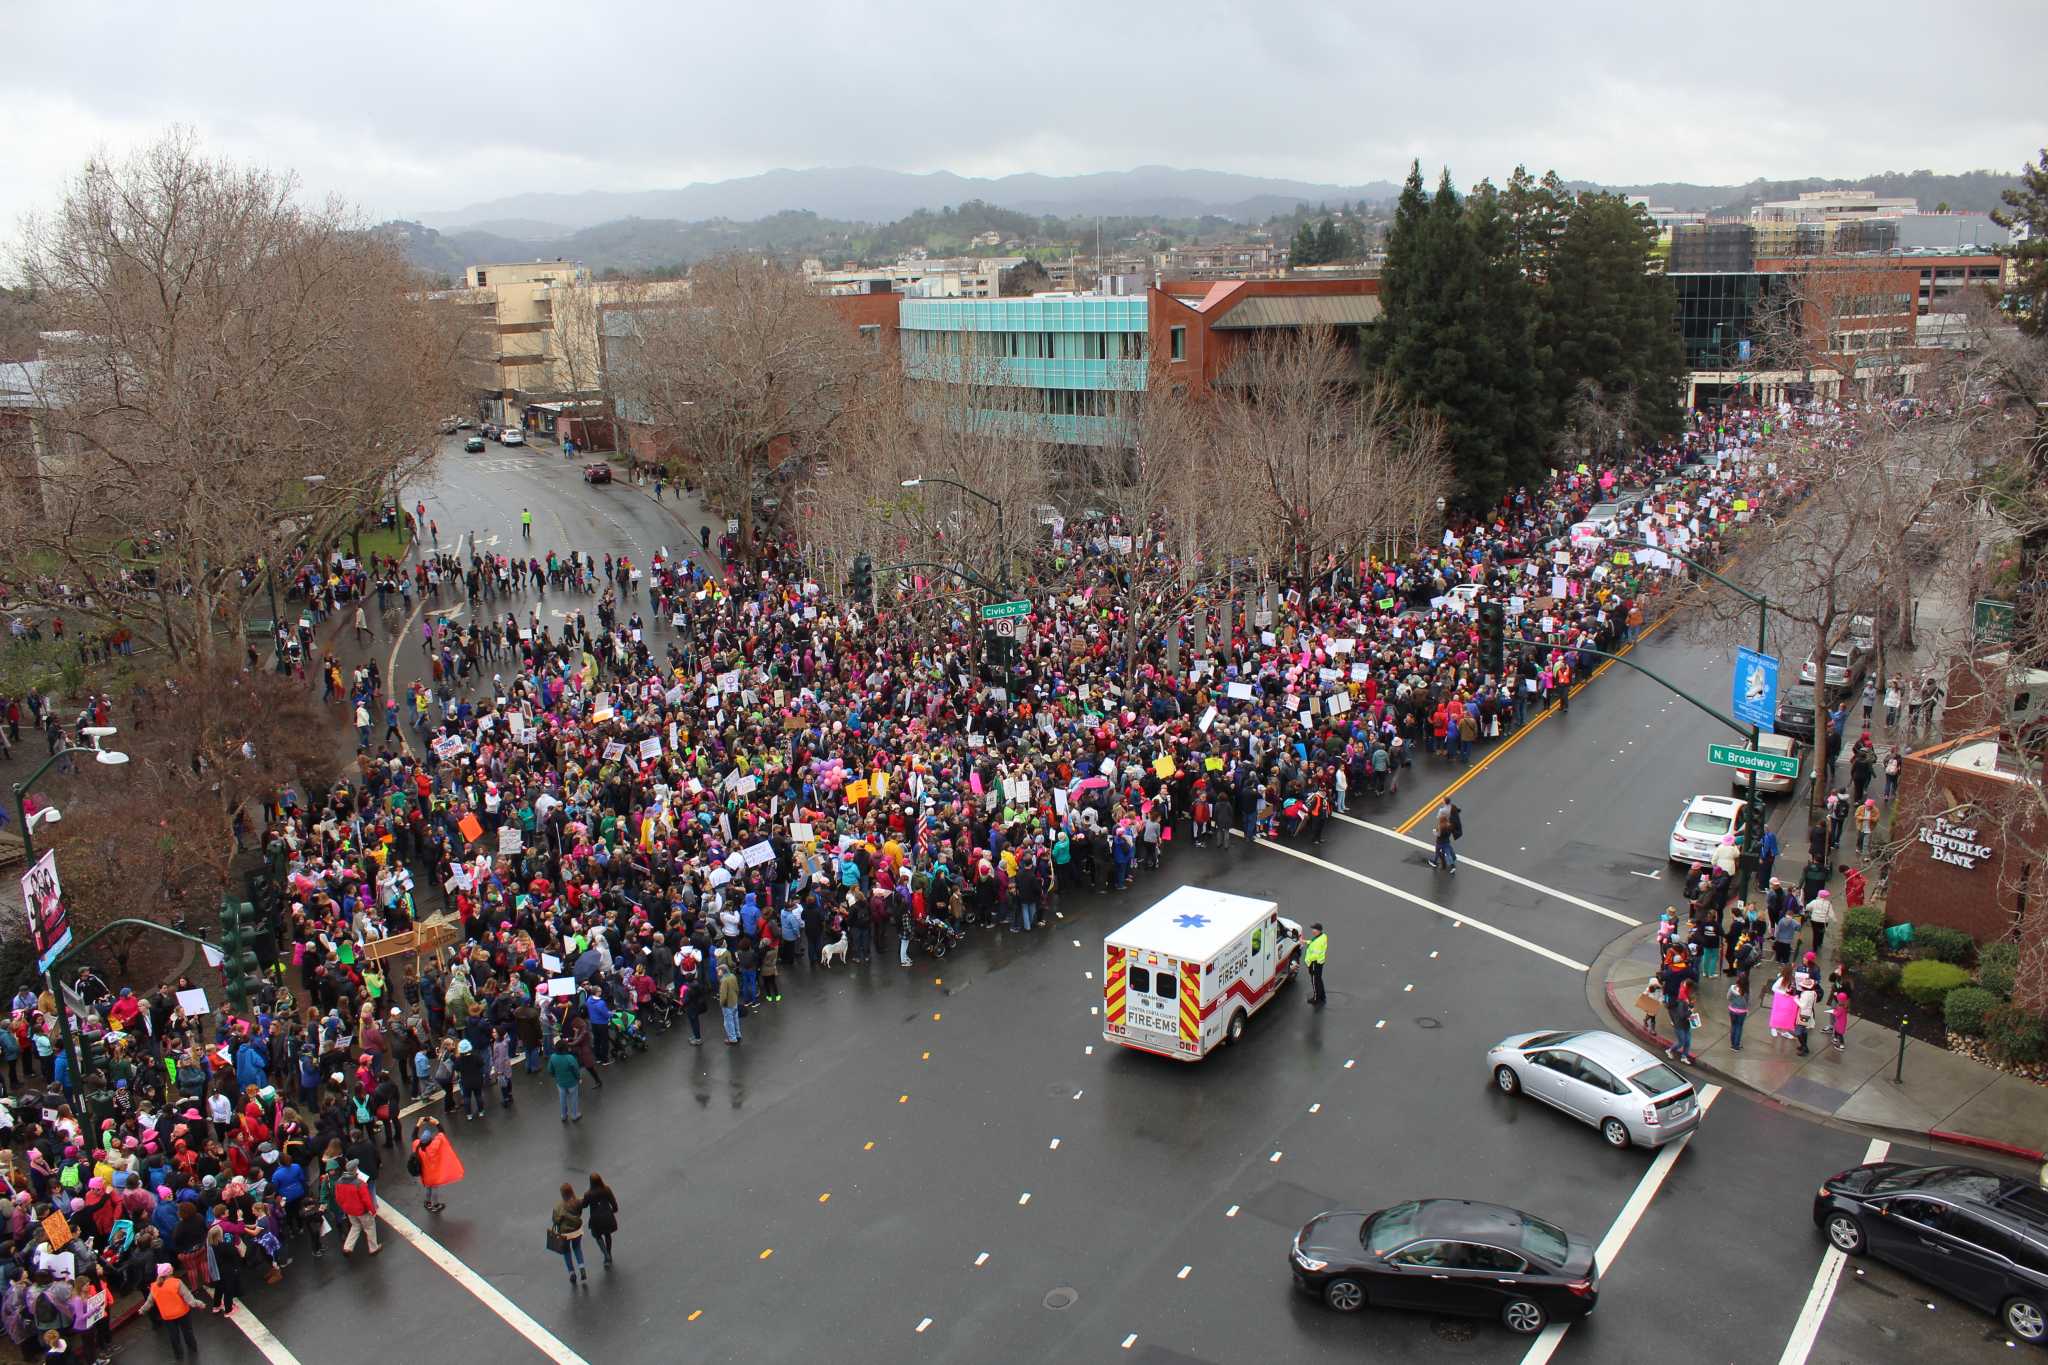 Thousands+gather+for+Womens+March+across+the+Bay+Area